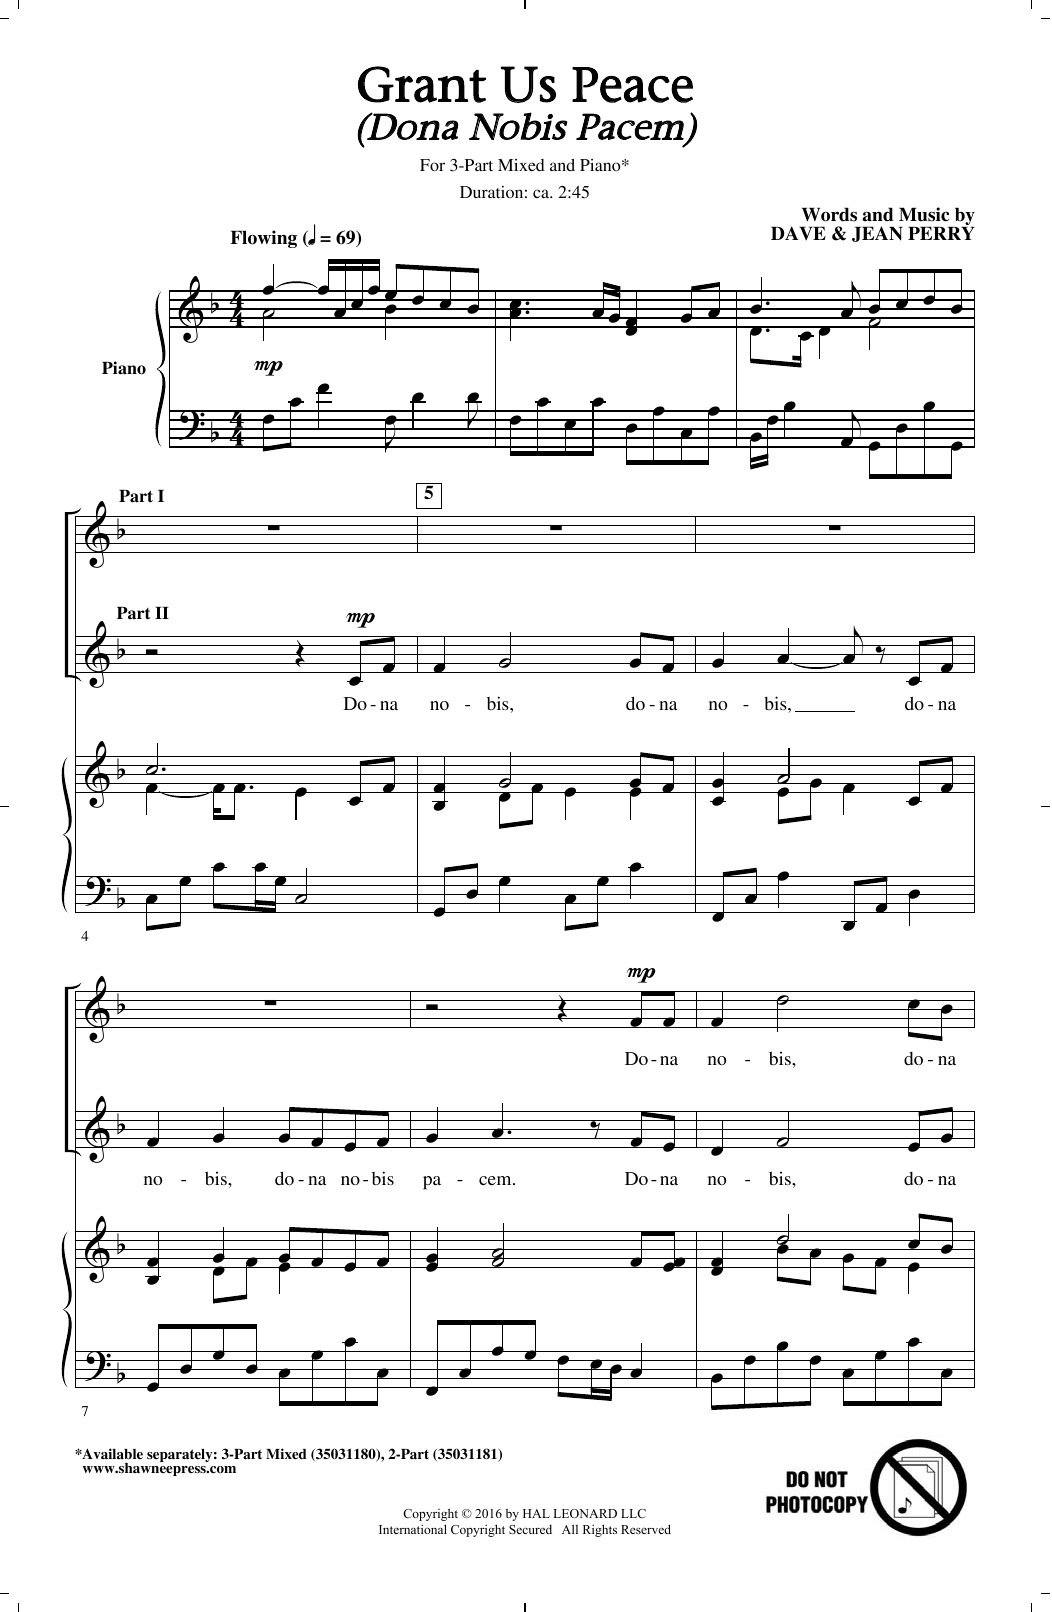 Download Dave and Jean Perry Grant Us Peace (Dona Nobis Pacem) Sheet Music